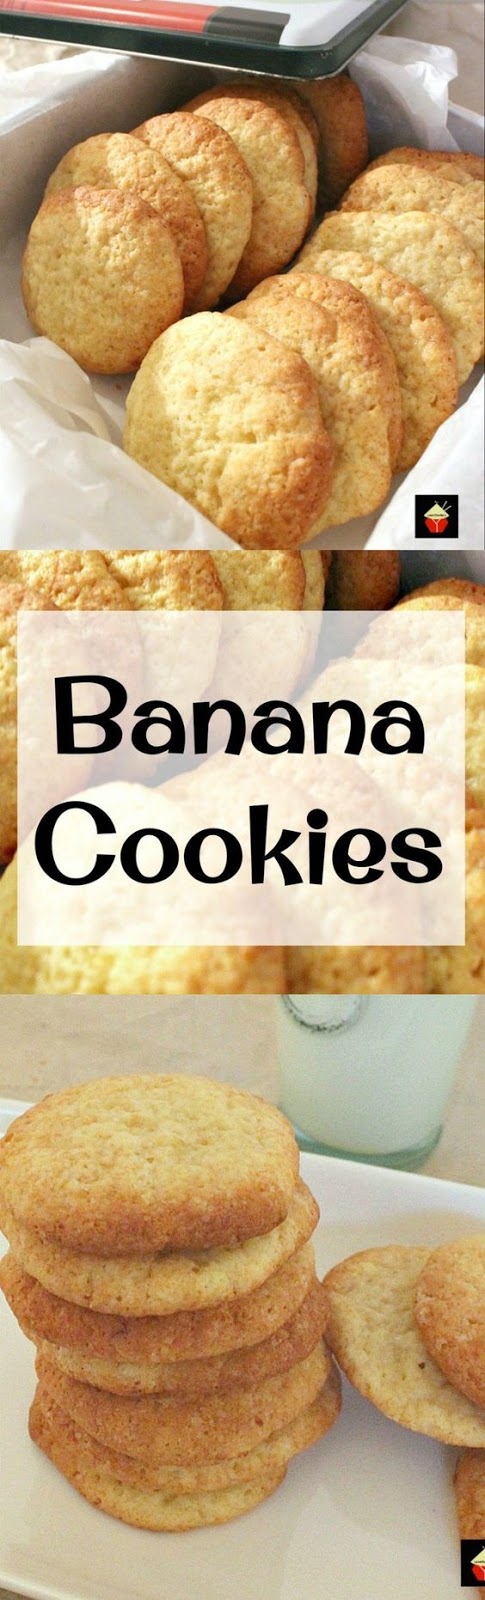 Banana Drop Cookies. Theses are a light fluffy cookie and great for using up those overripe bananas! Easy recipe too! | Lovefoodies.com